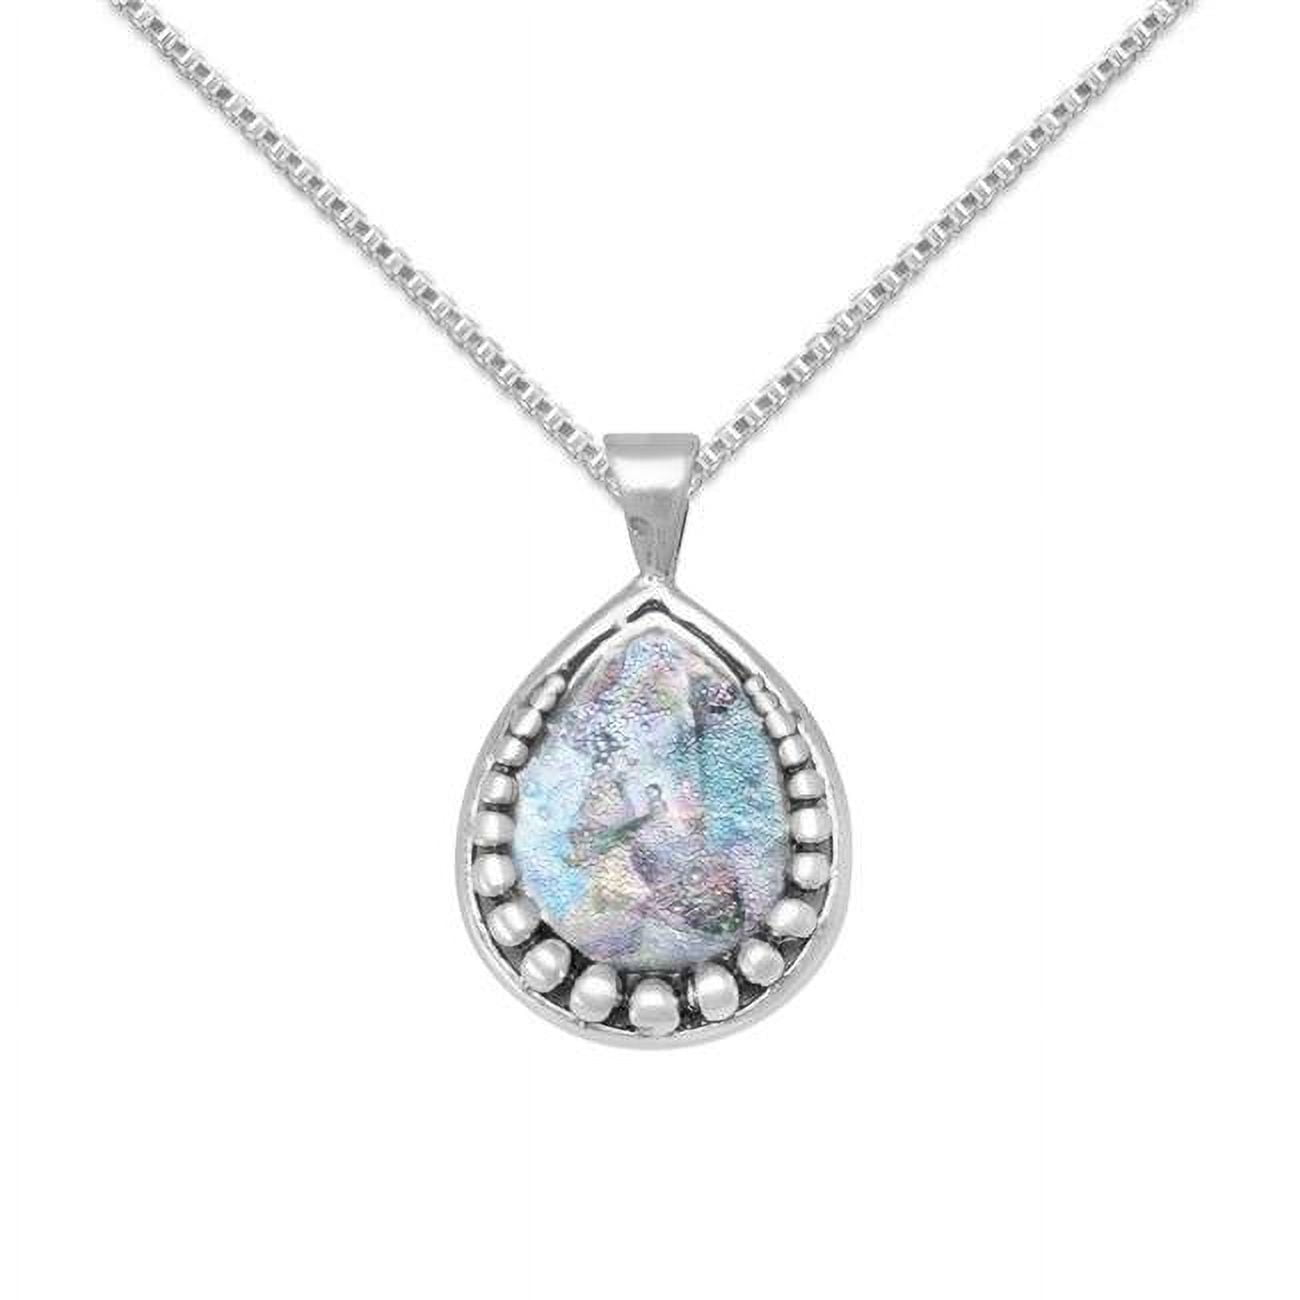 73444-16 16 In. Sterling Silver Pear Shape Roman Glass Pendant With 1.5 Mm Box Chain